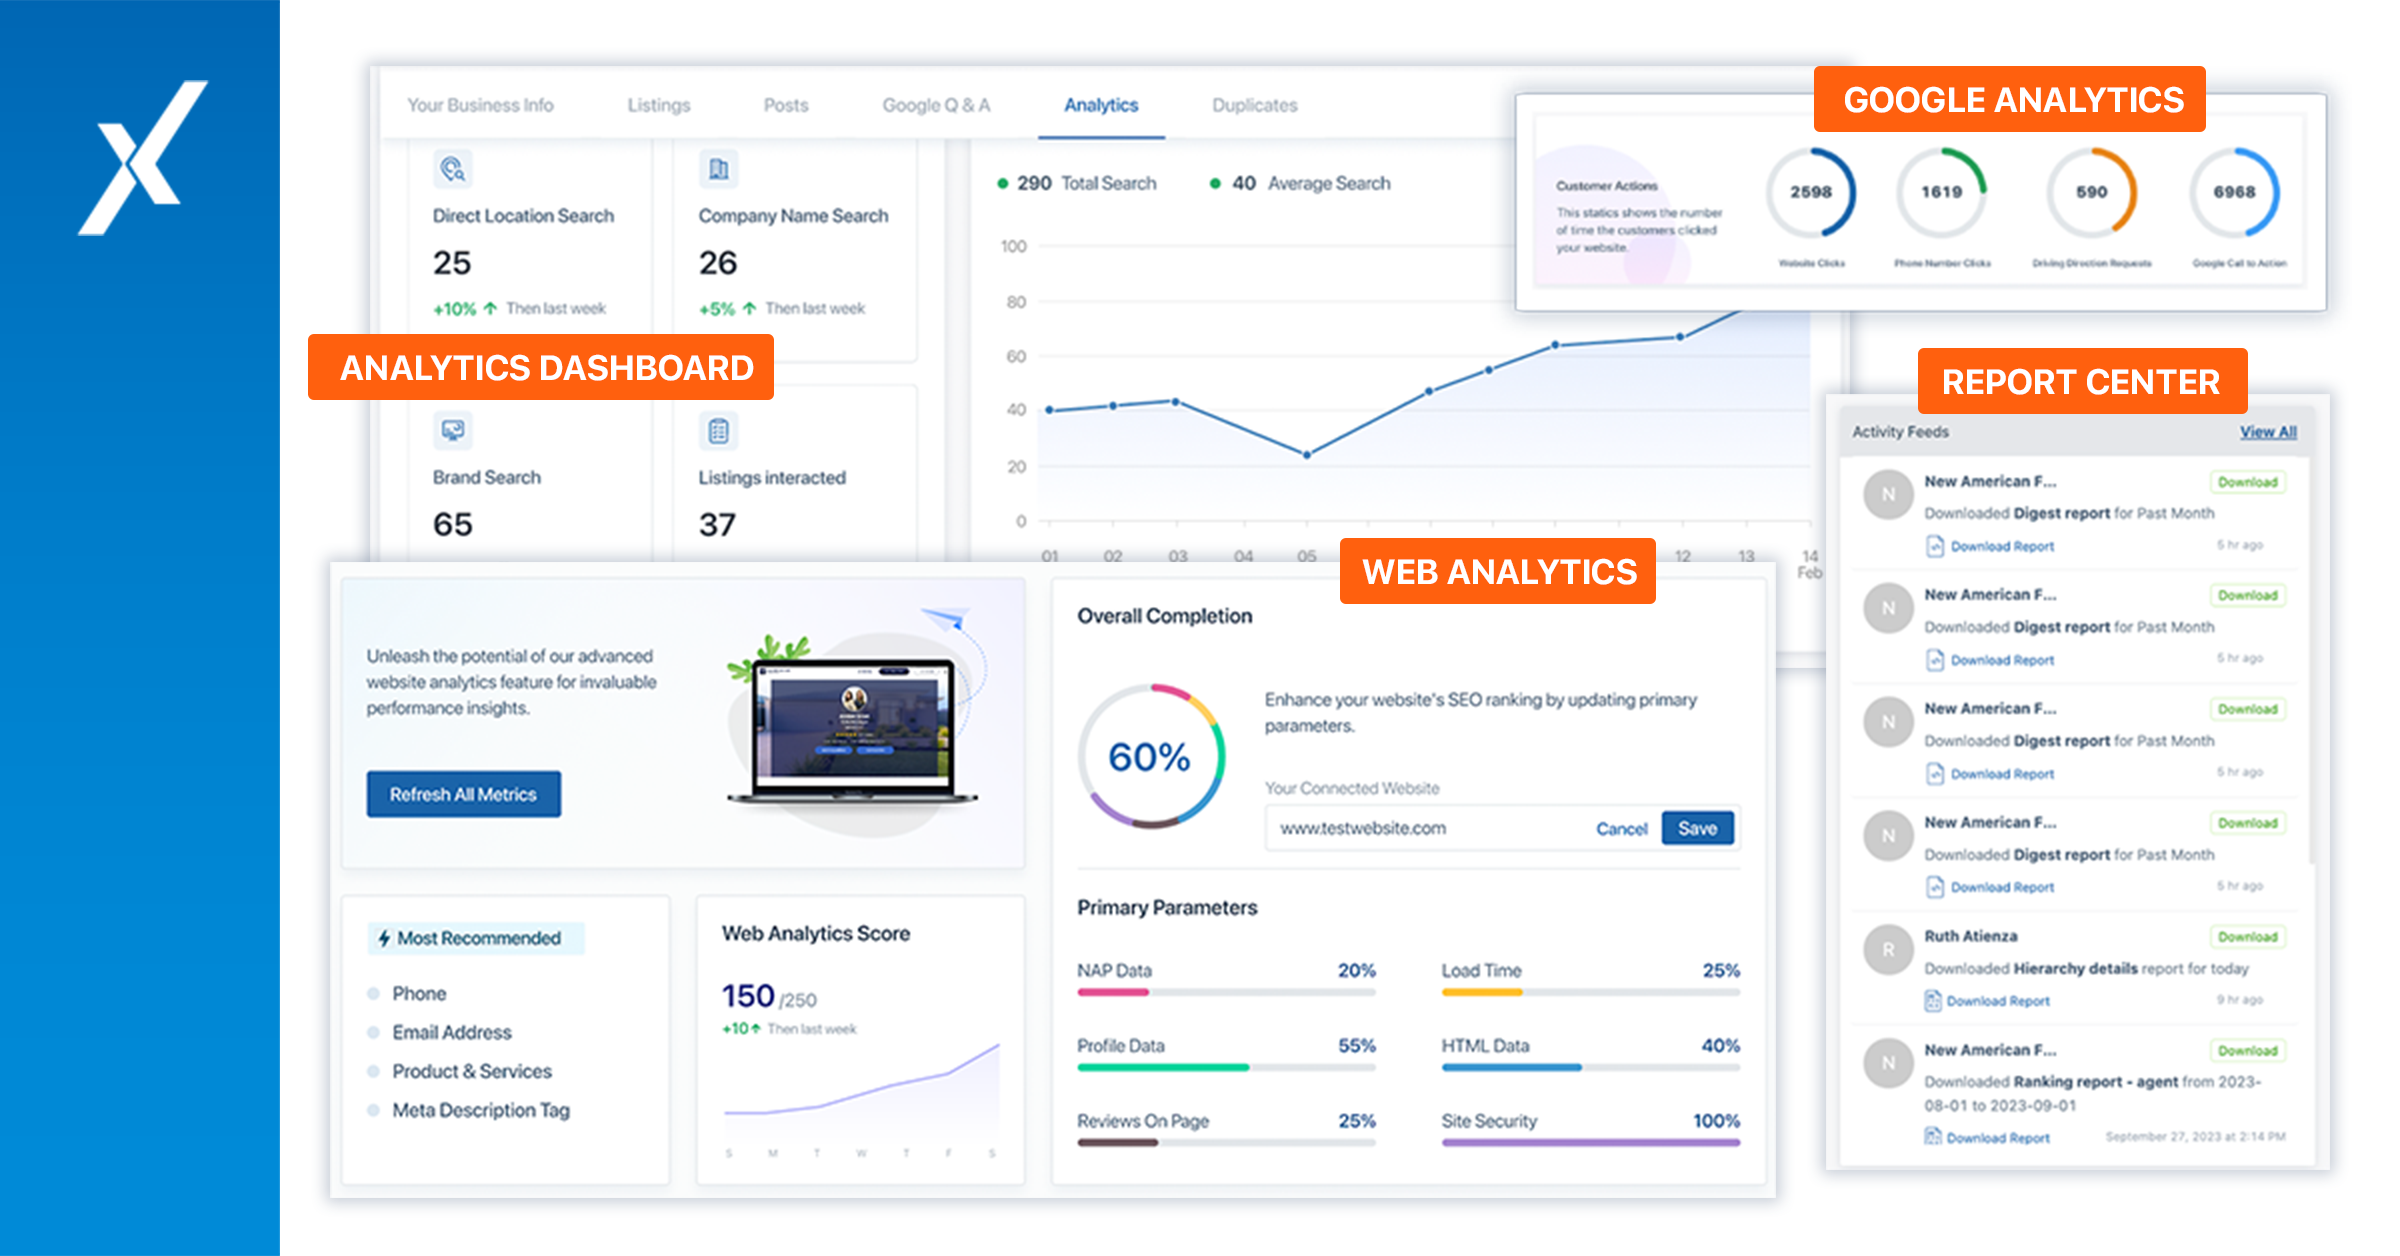 Customizable data visualizations and analytics to track key performance indicators, monitor trends, and make data-driven decisions. It offers comprehensive insights into various aspects of your business so that you can make the right choices in real-time.